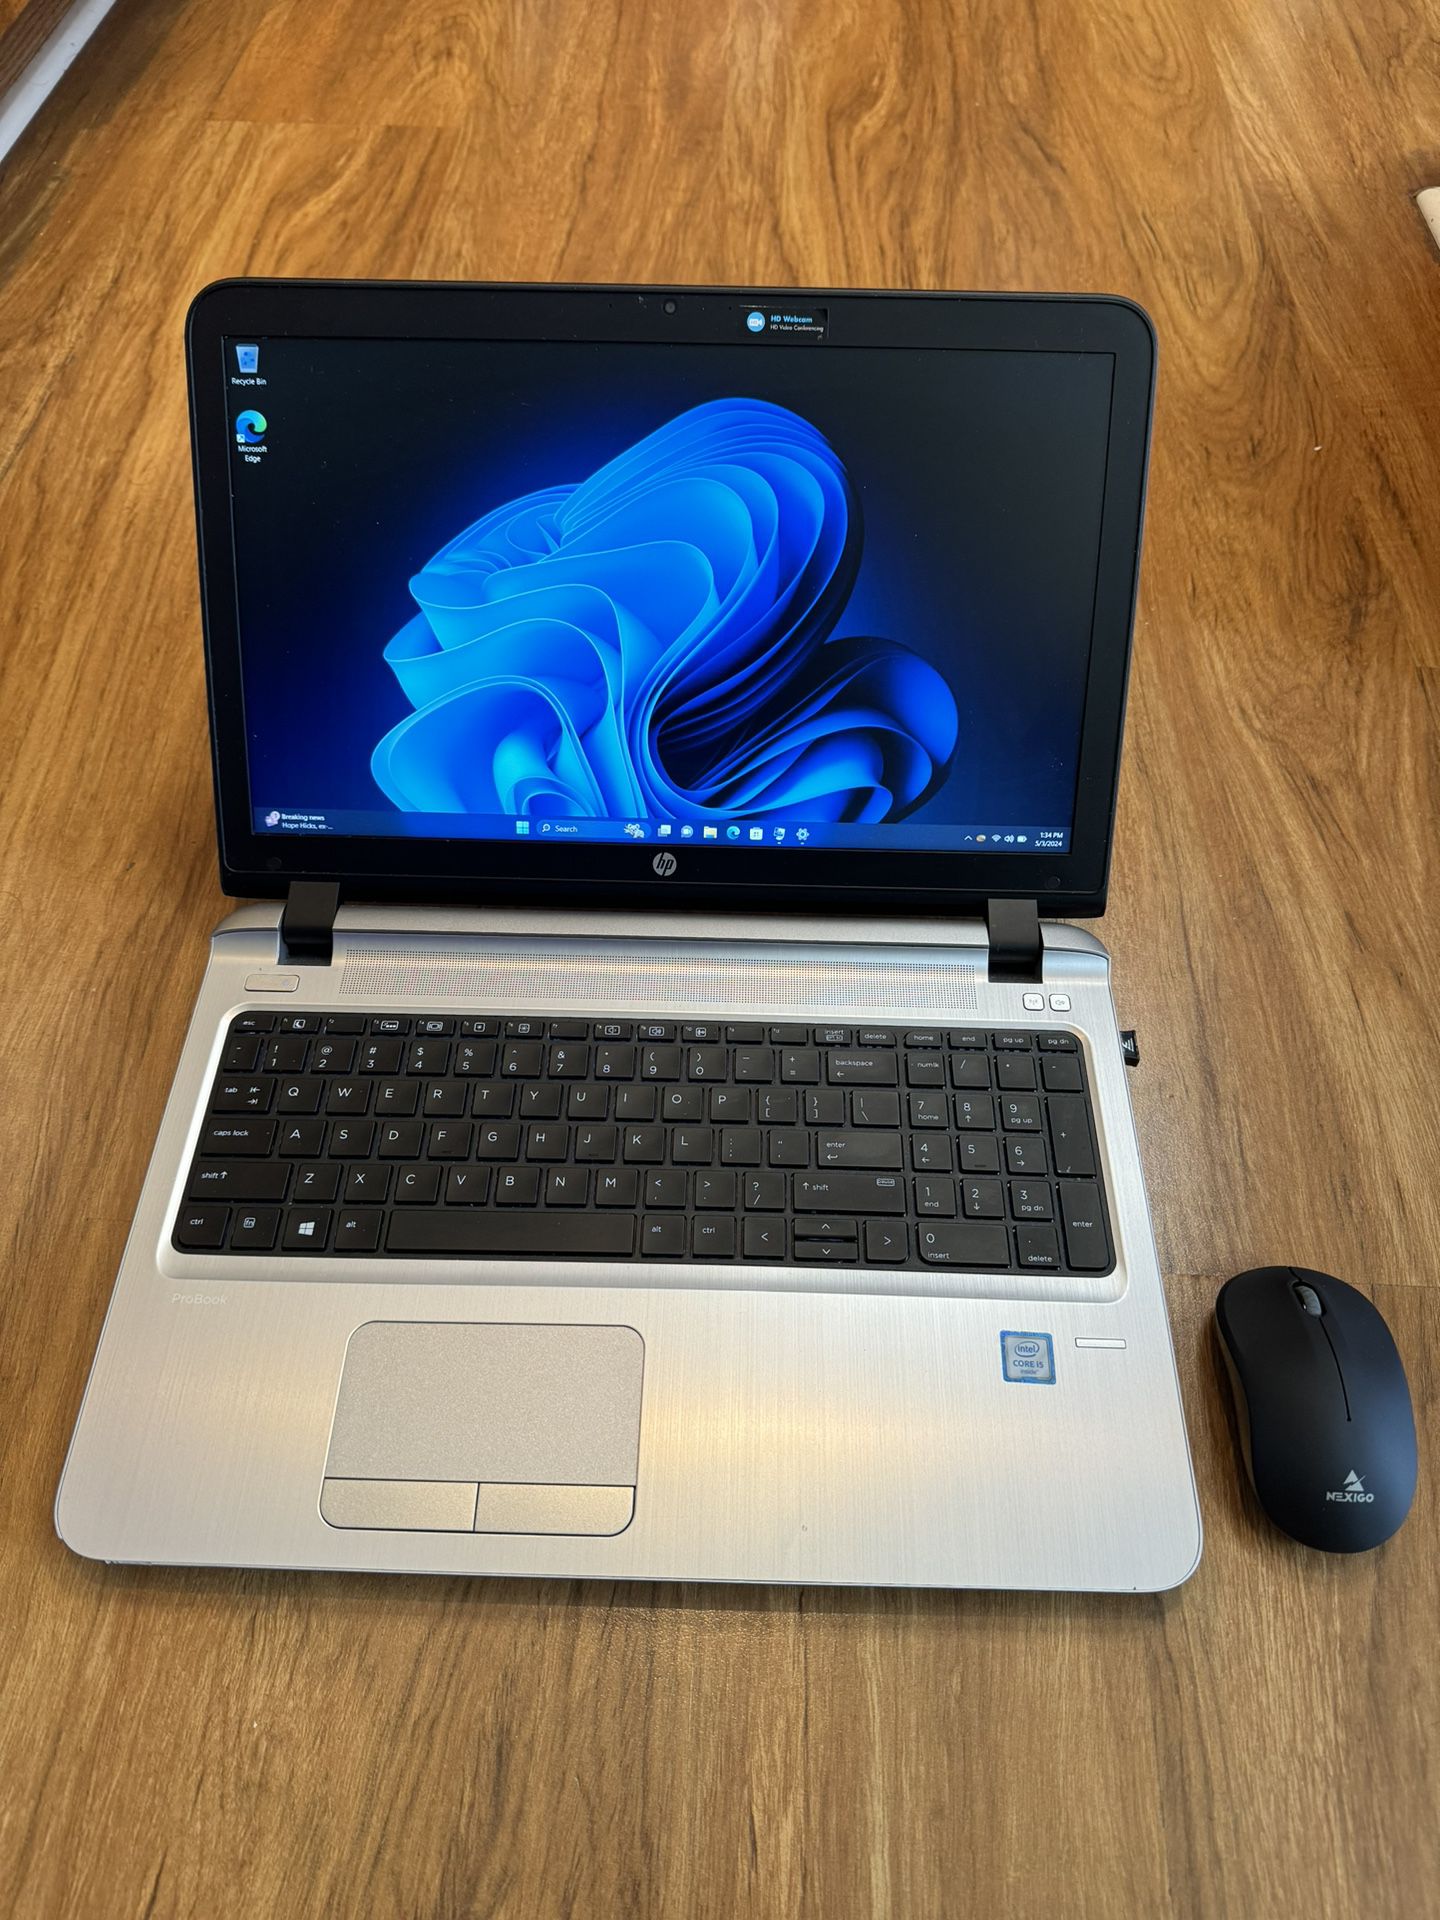 HP ProBook 450 G3 core i5 6th gen 8GB Ram 256GB SSD Windows 11 Pro 15.6” Laptop with wireless Mice & charger in Excellent Working condition!!!!!!  Spe